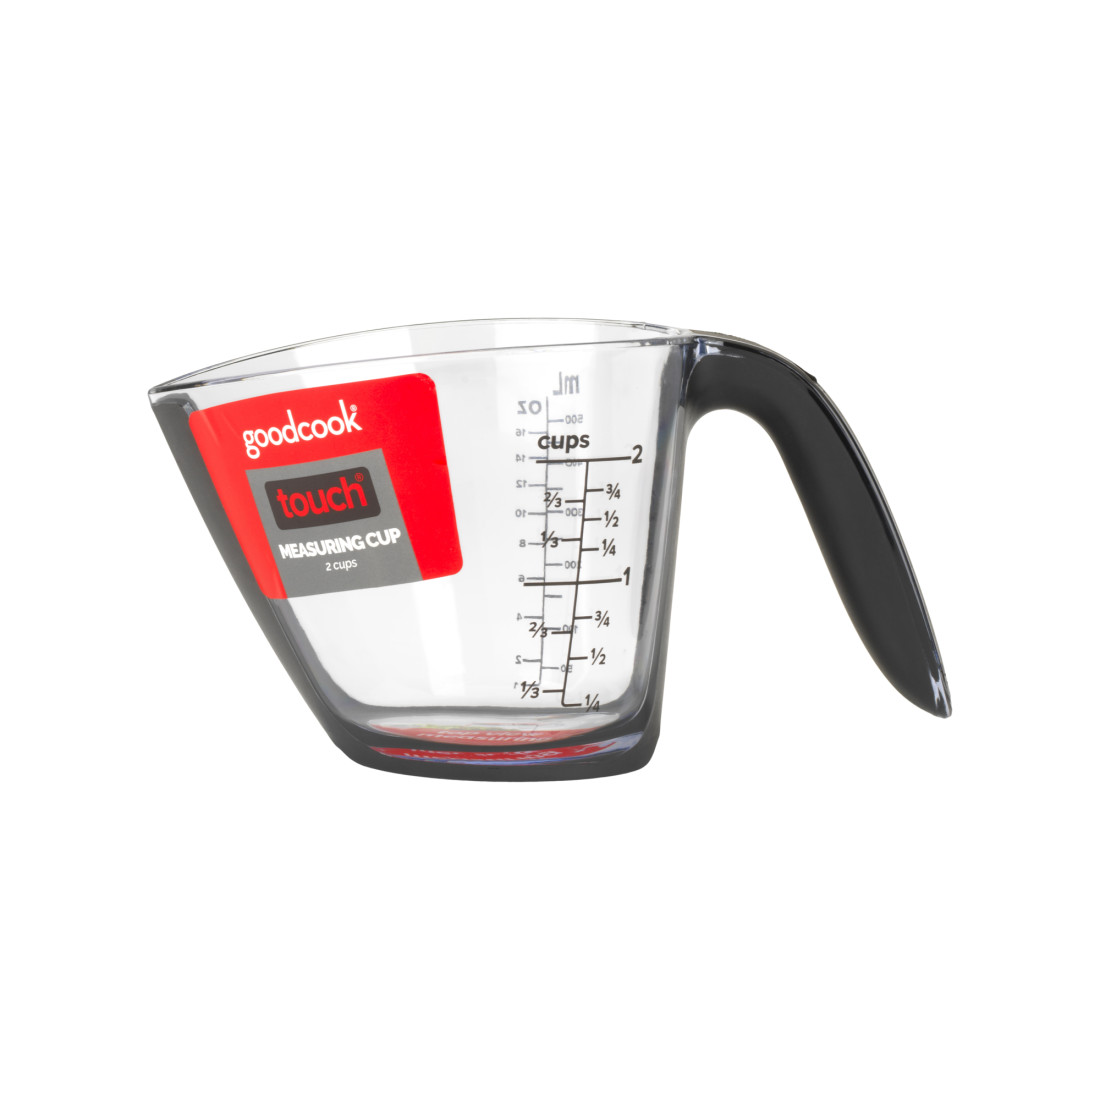 2-Cup Liquid Measuring Cup with Top-View Measuring - GoodCook